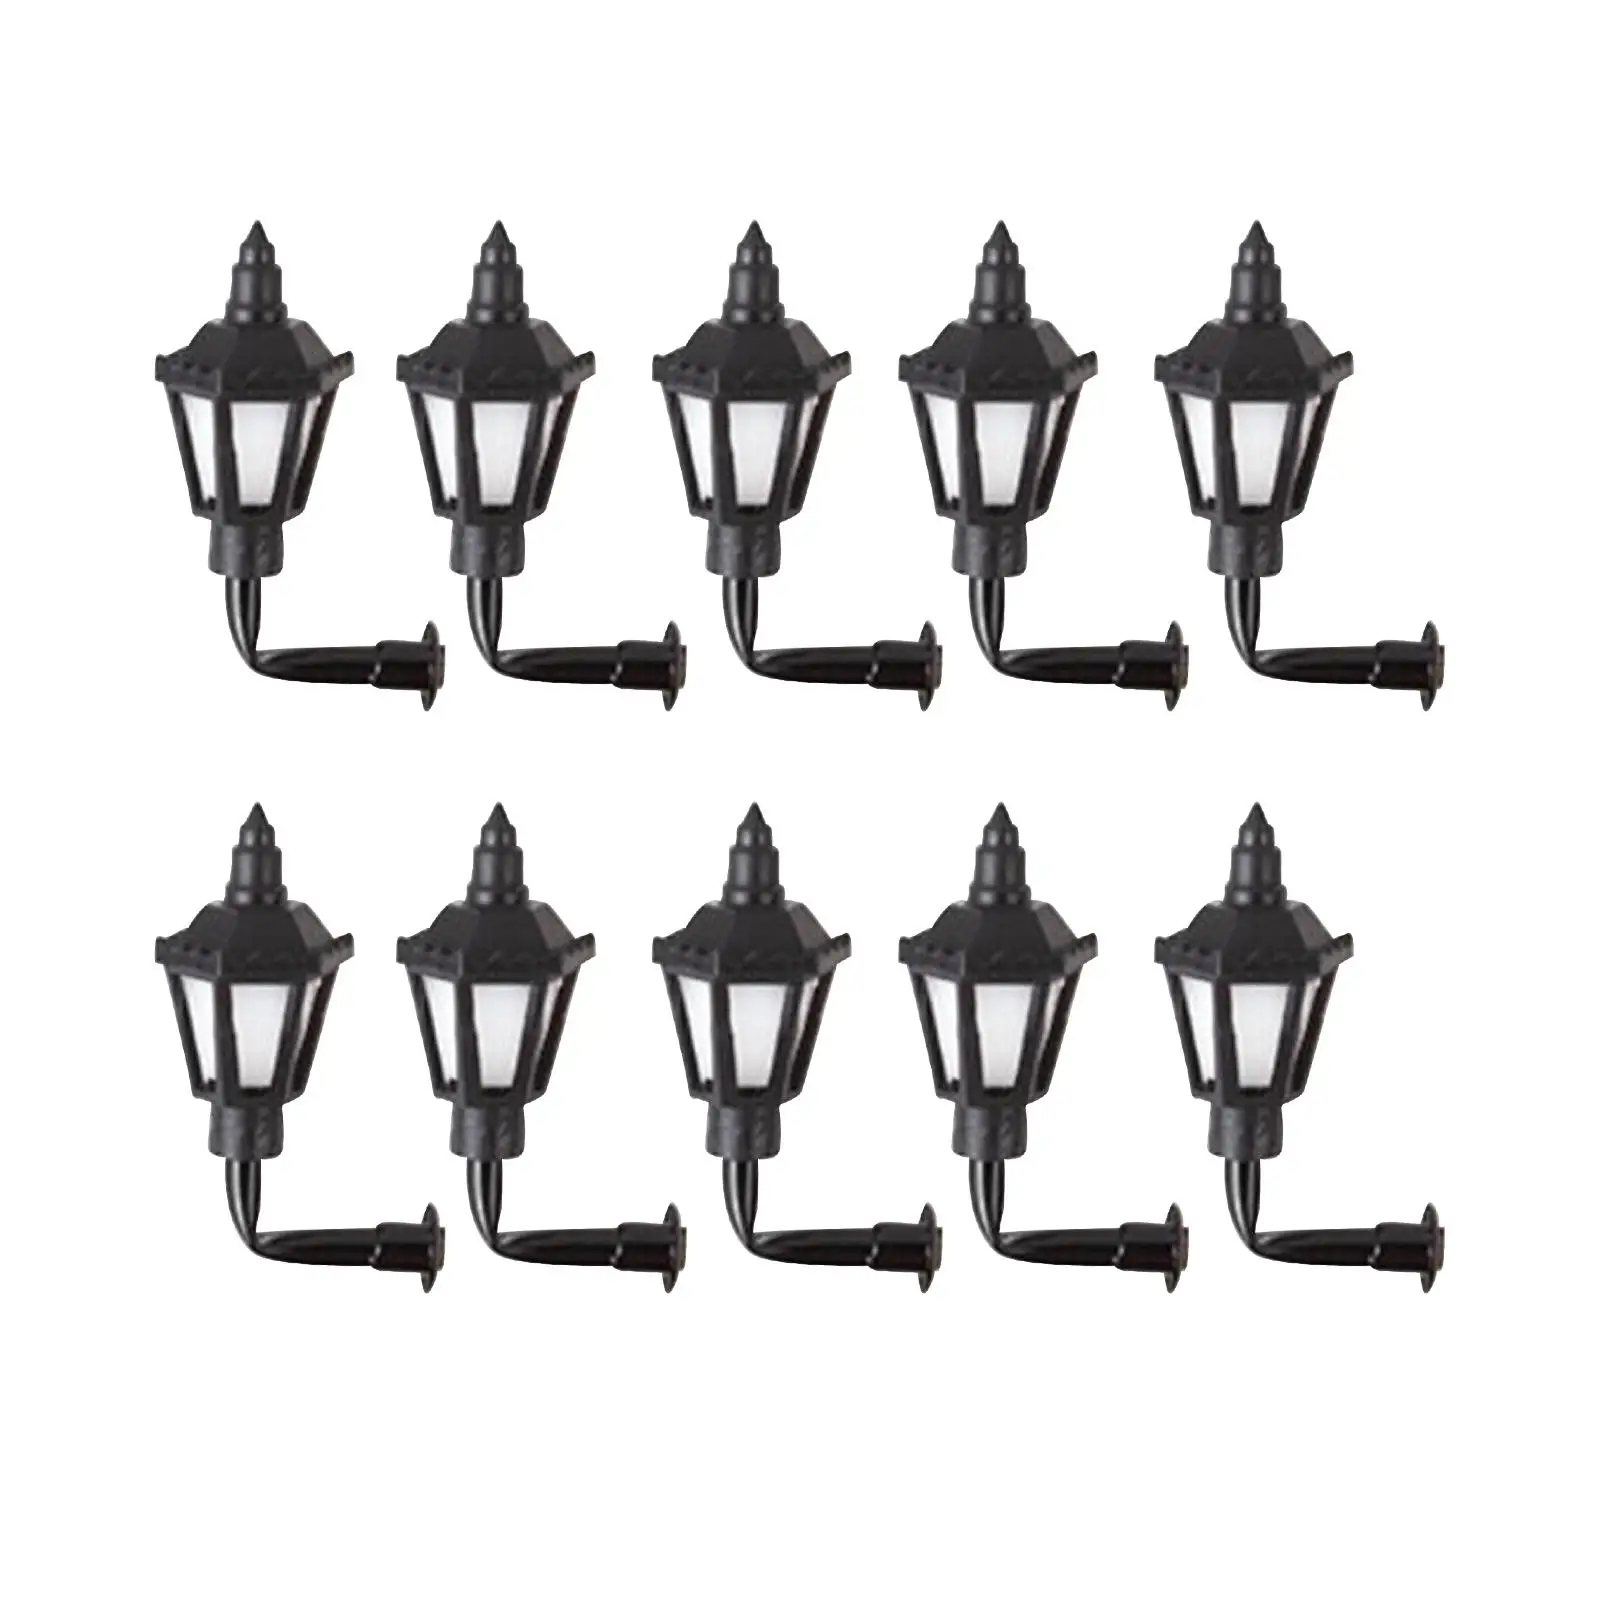 10x Mini Miniature Street Light Model for Dollhouse Decoration Toy Accessory 1/87 Building Sand Table Streets Lamps Hanging Lamp